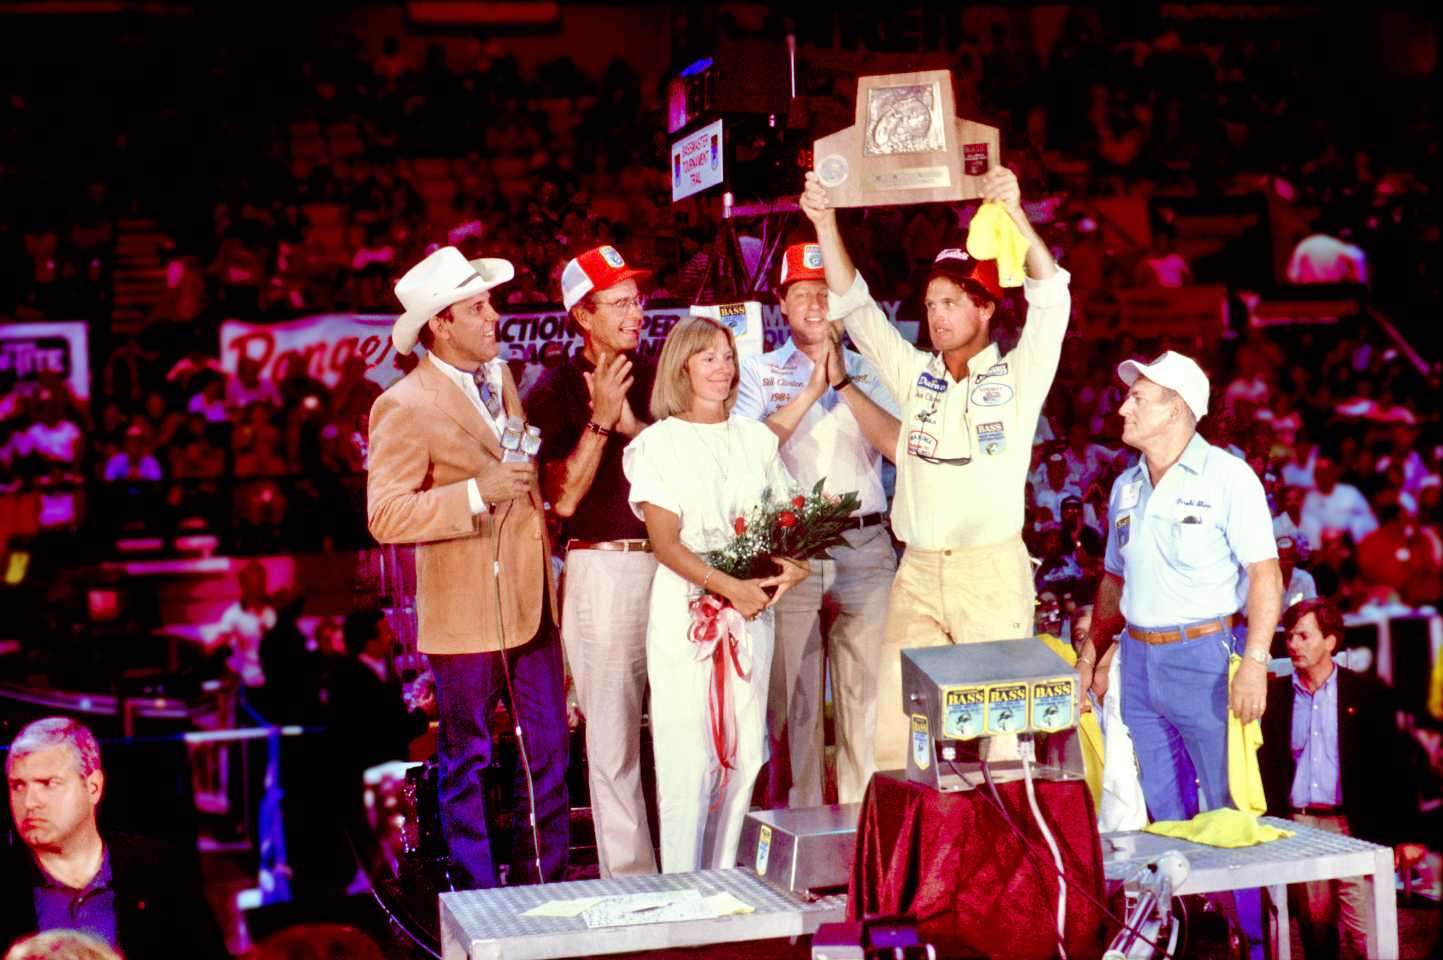 Rick Clunn won his third of four Classics in 1984 on the Arkansas River. The win wasnât even close. Clunn won with 75-9, while Greg South finished second with 50-1. 
